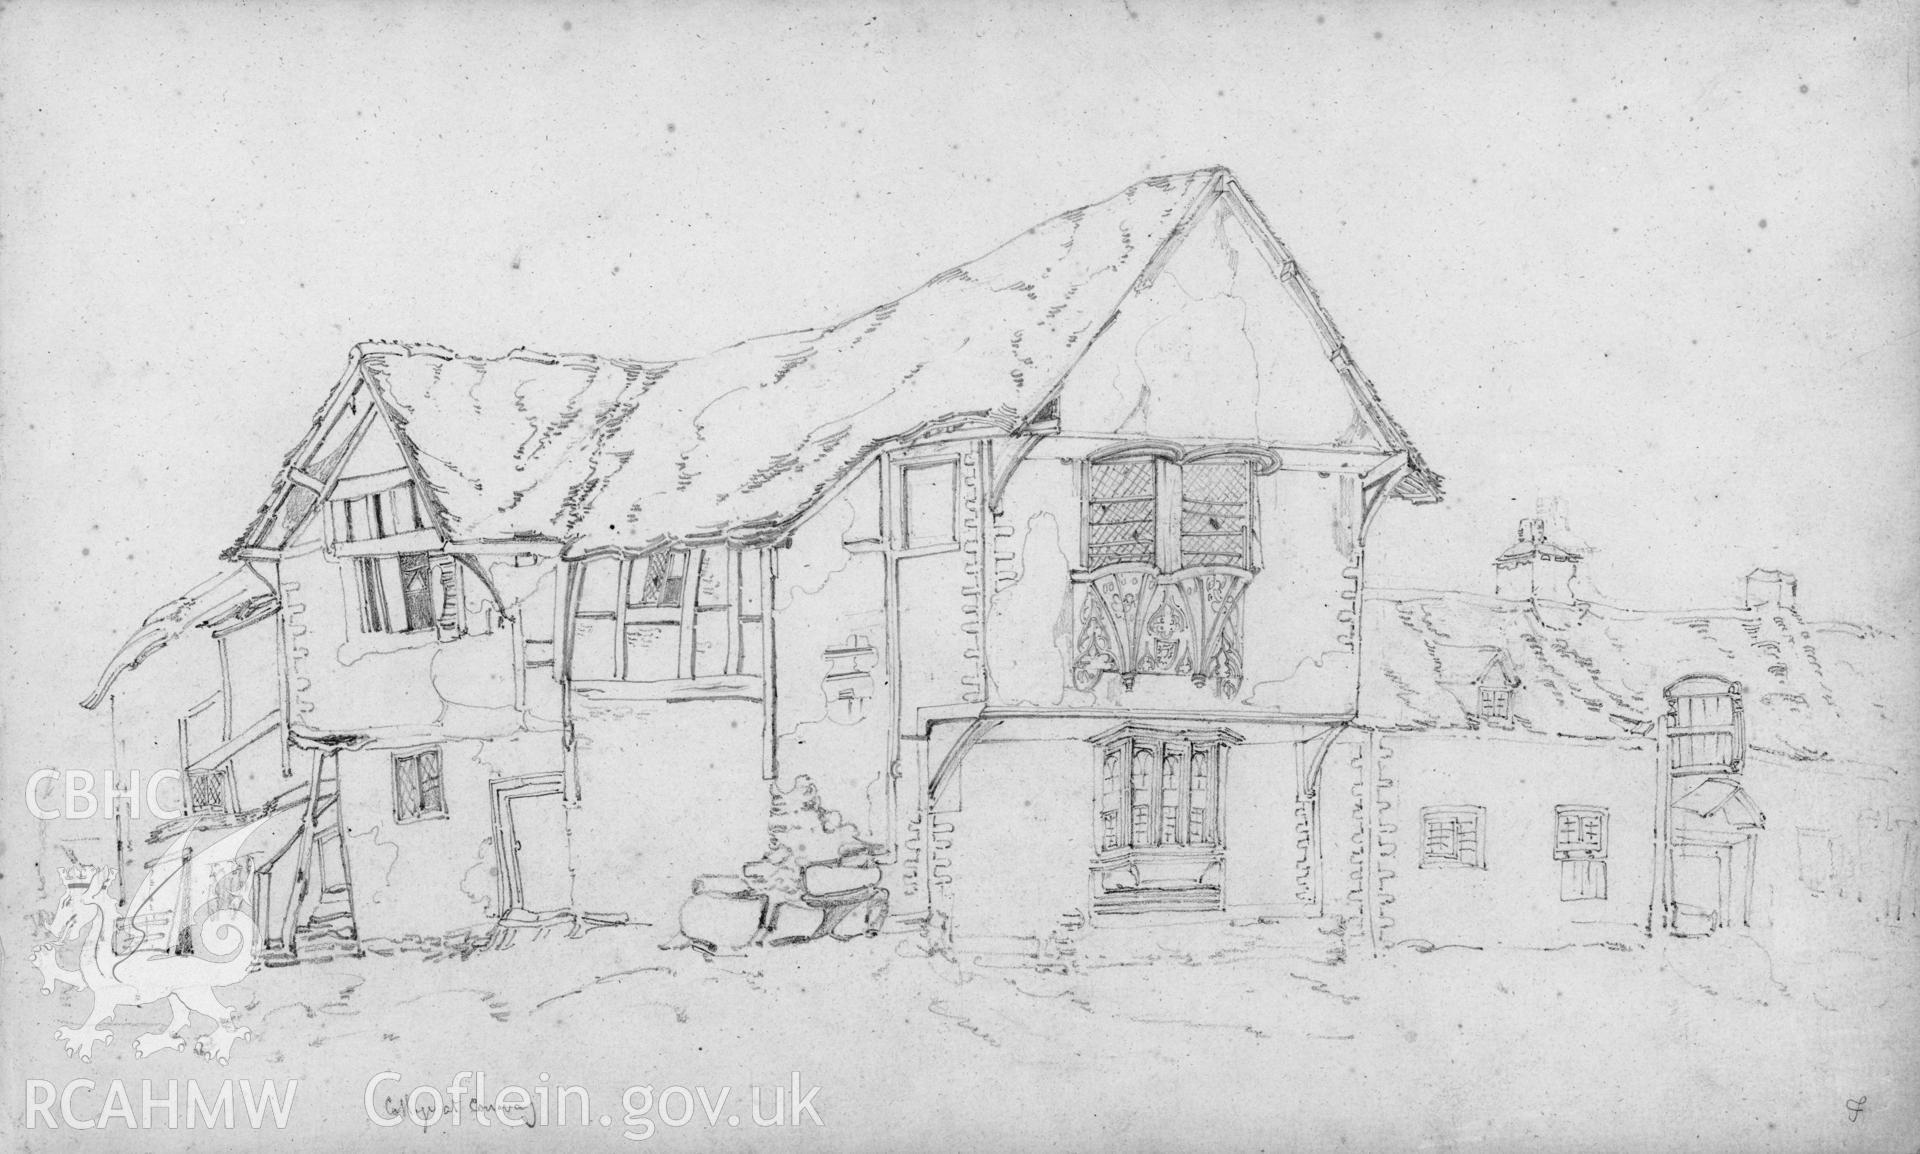 Digital copy of a pencil drawing showing  view of The College, Conwy, anon, c1820.